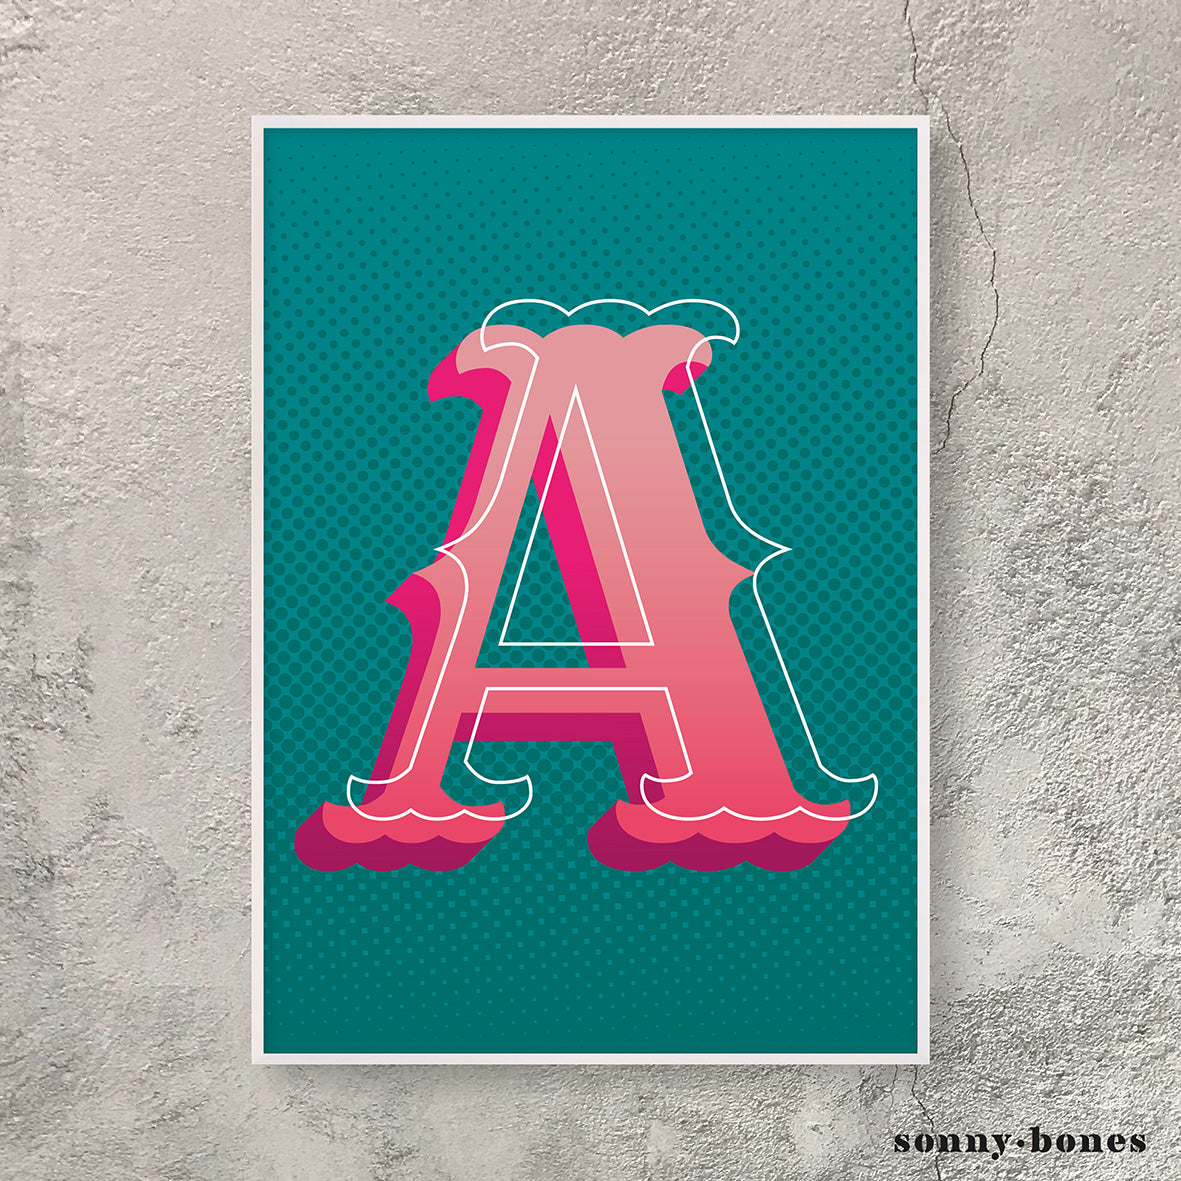 Circus Letter A (green/pink)